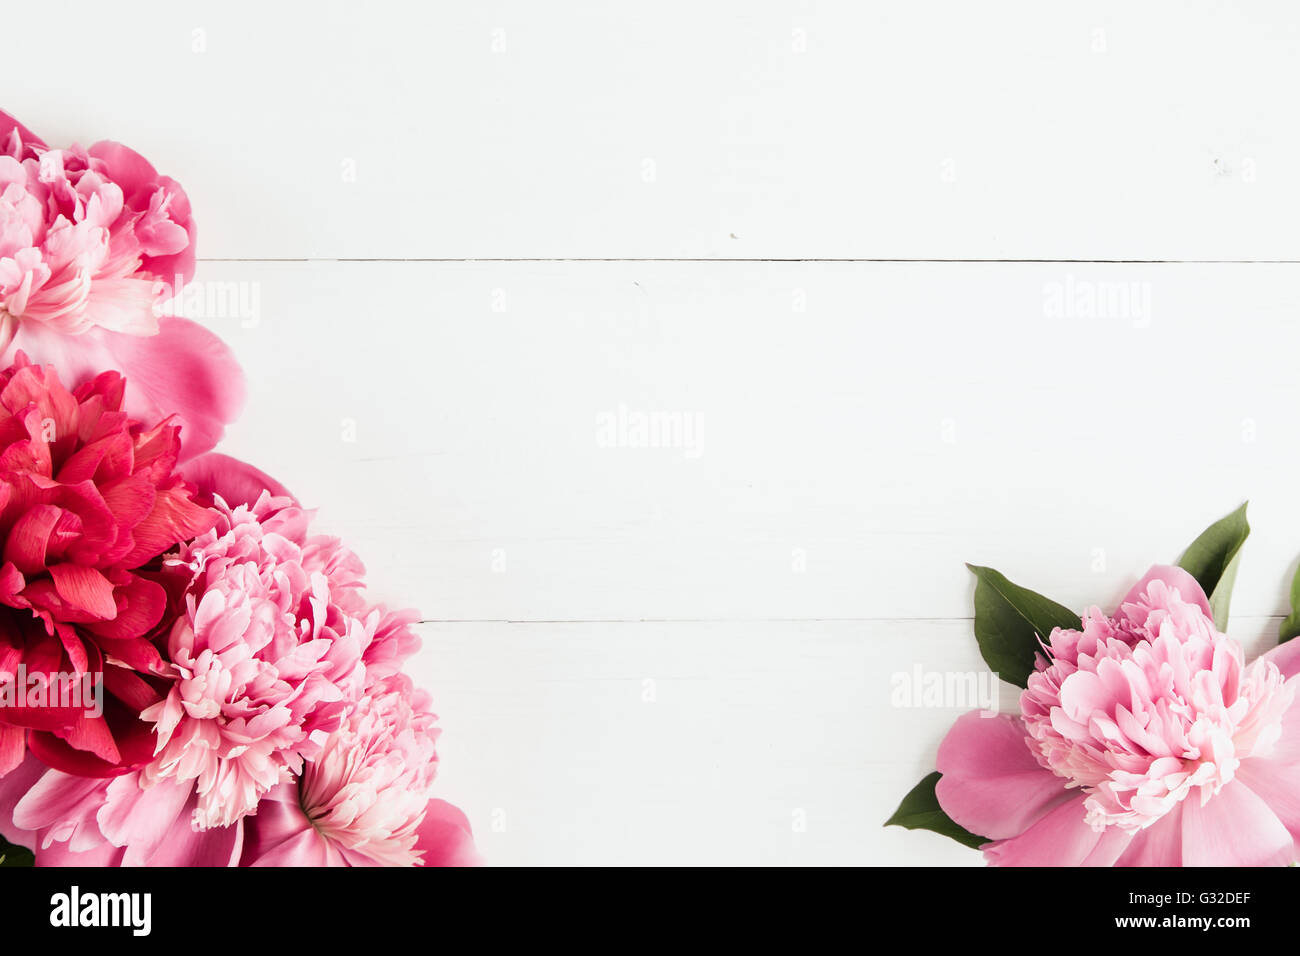 Summer floral frame with pink peonies Stock Photo